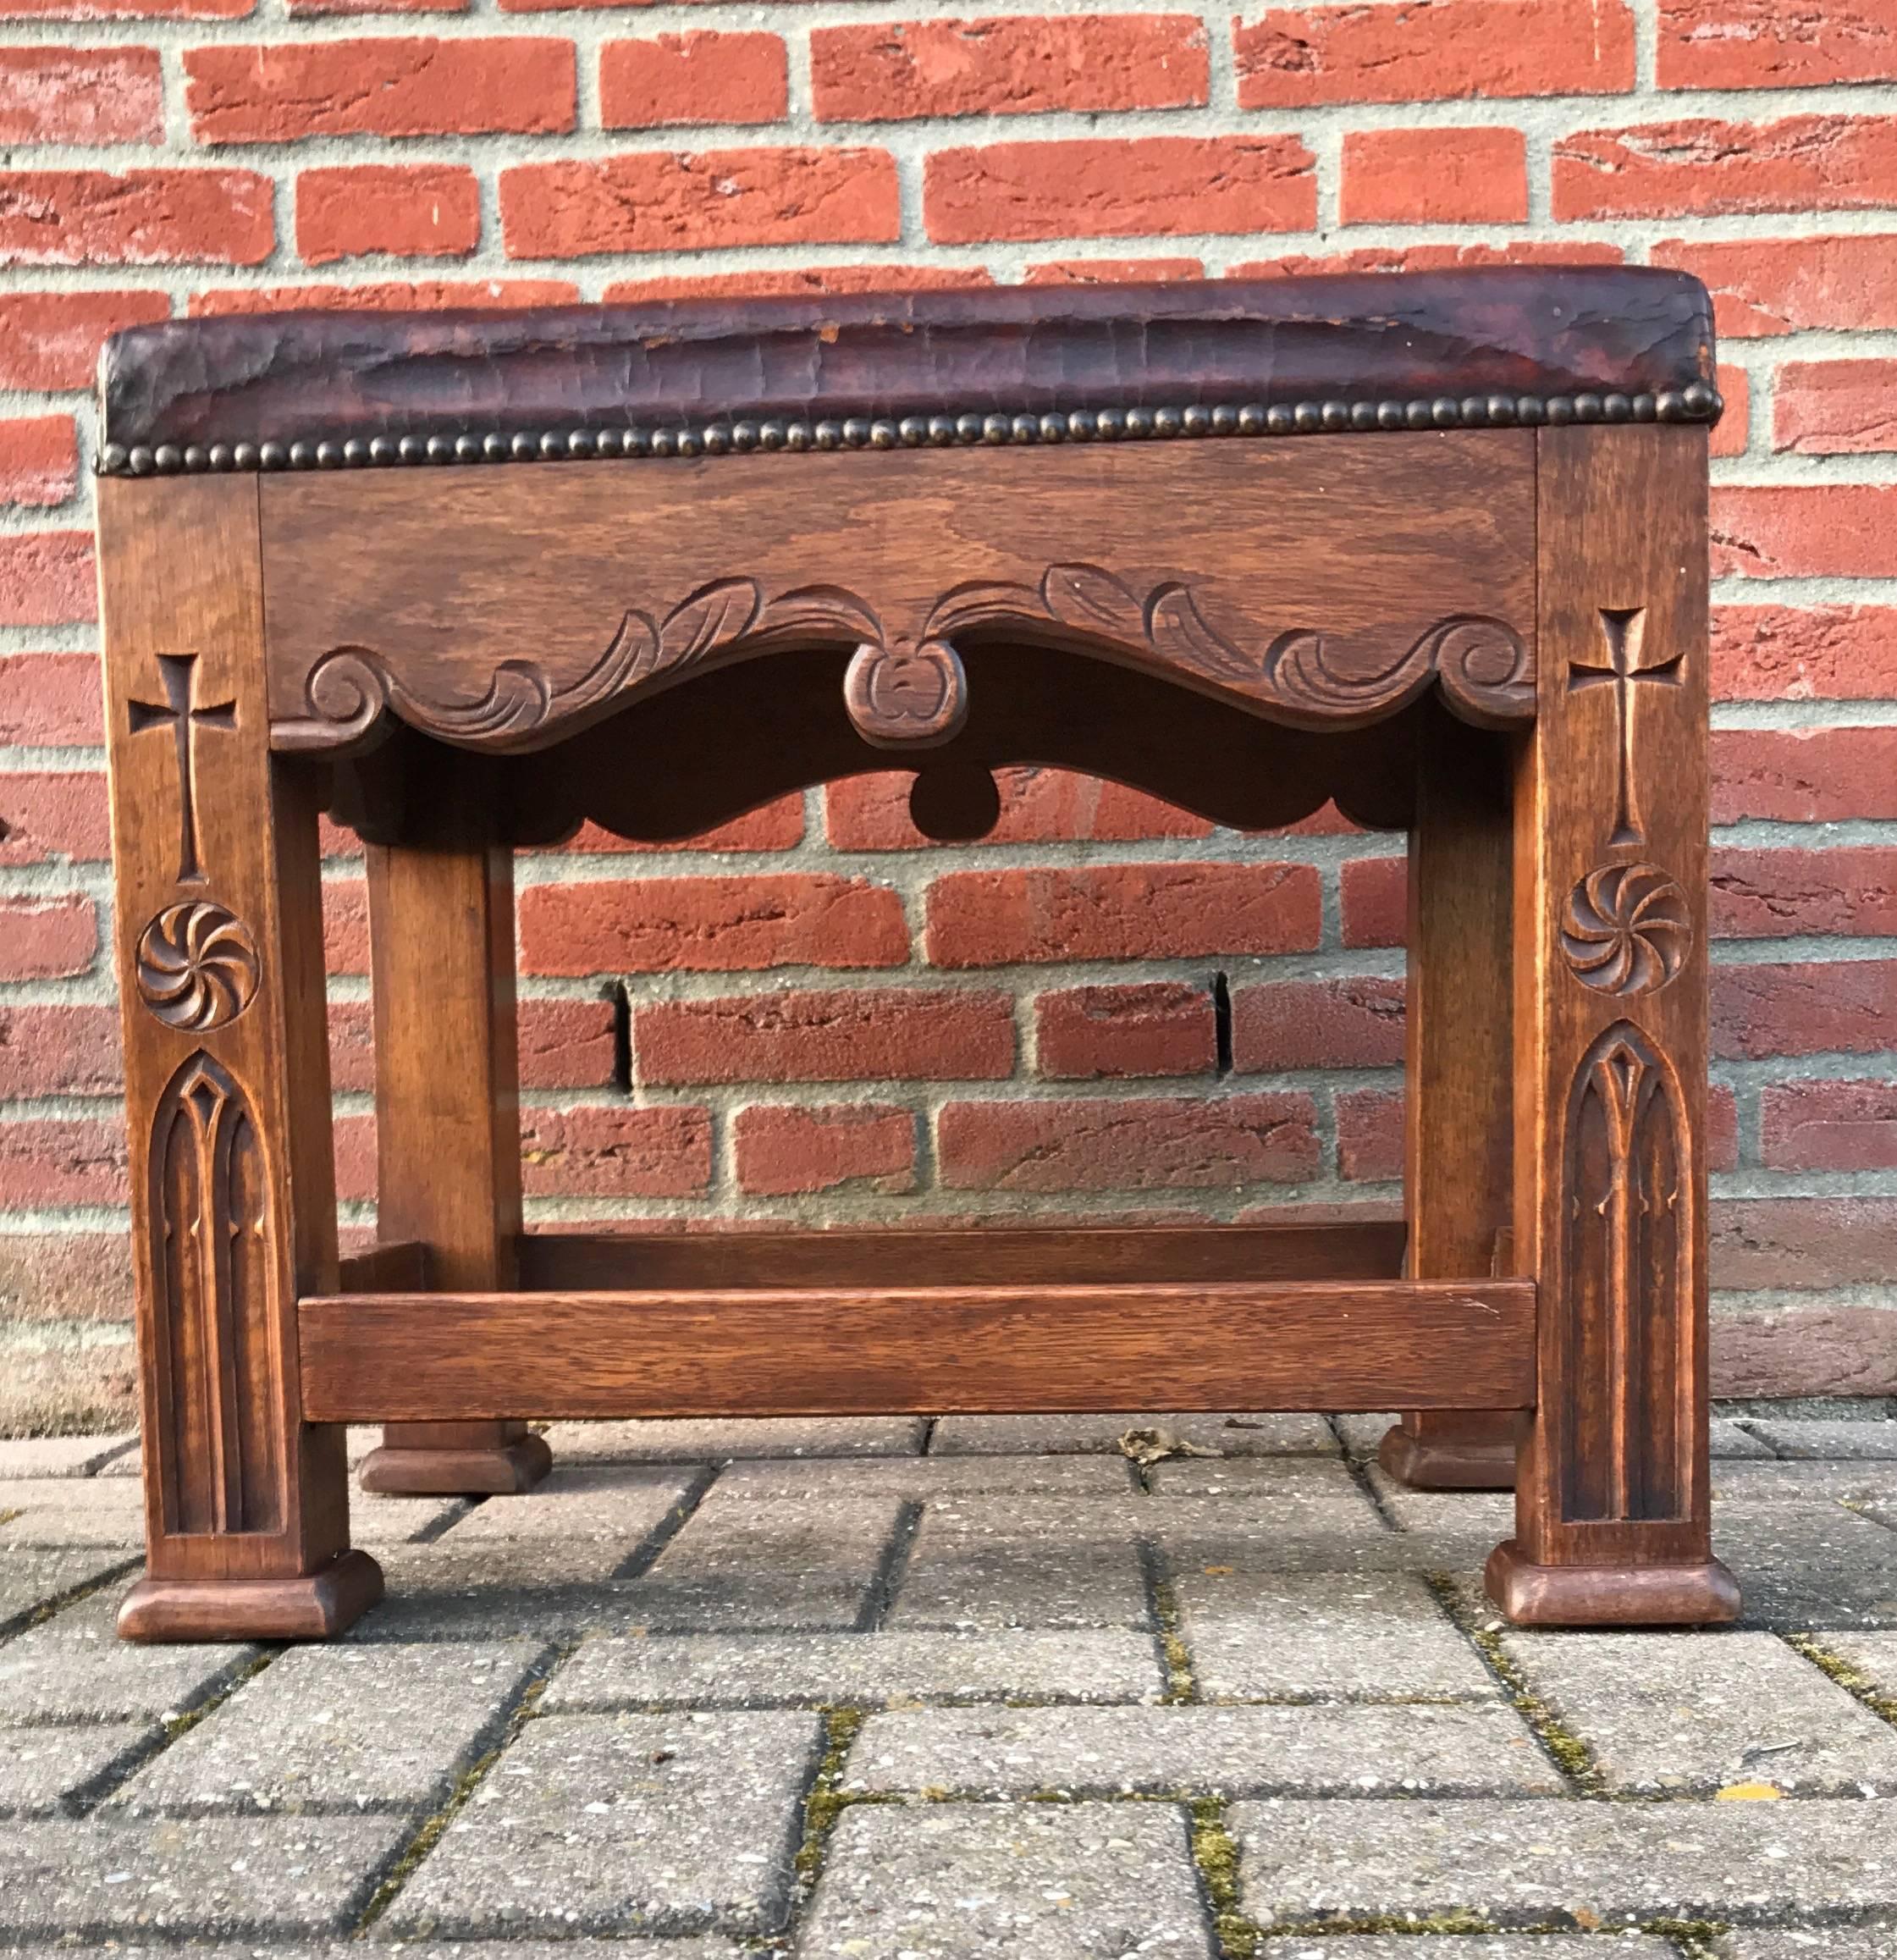 Dutch Unique and Quality Carved Gothic Revival Oak Stool with Original Leather Seating